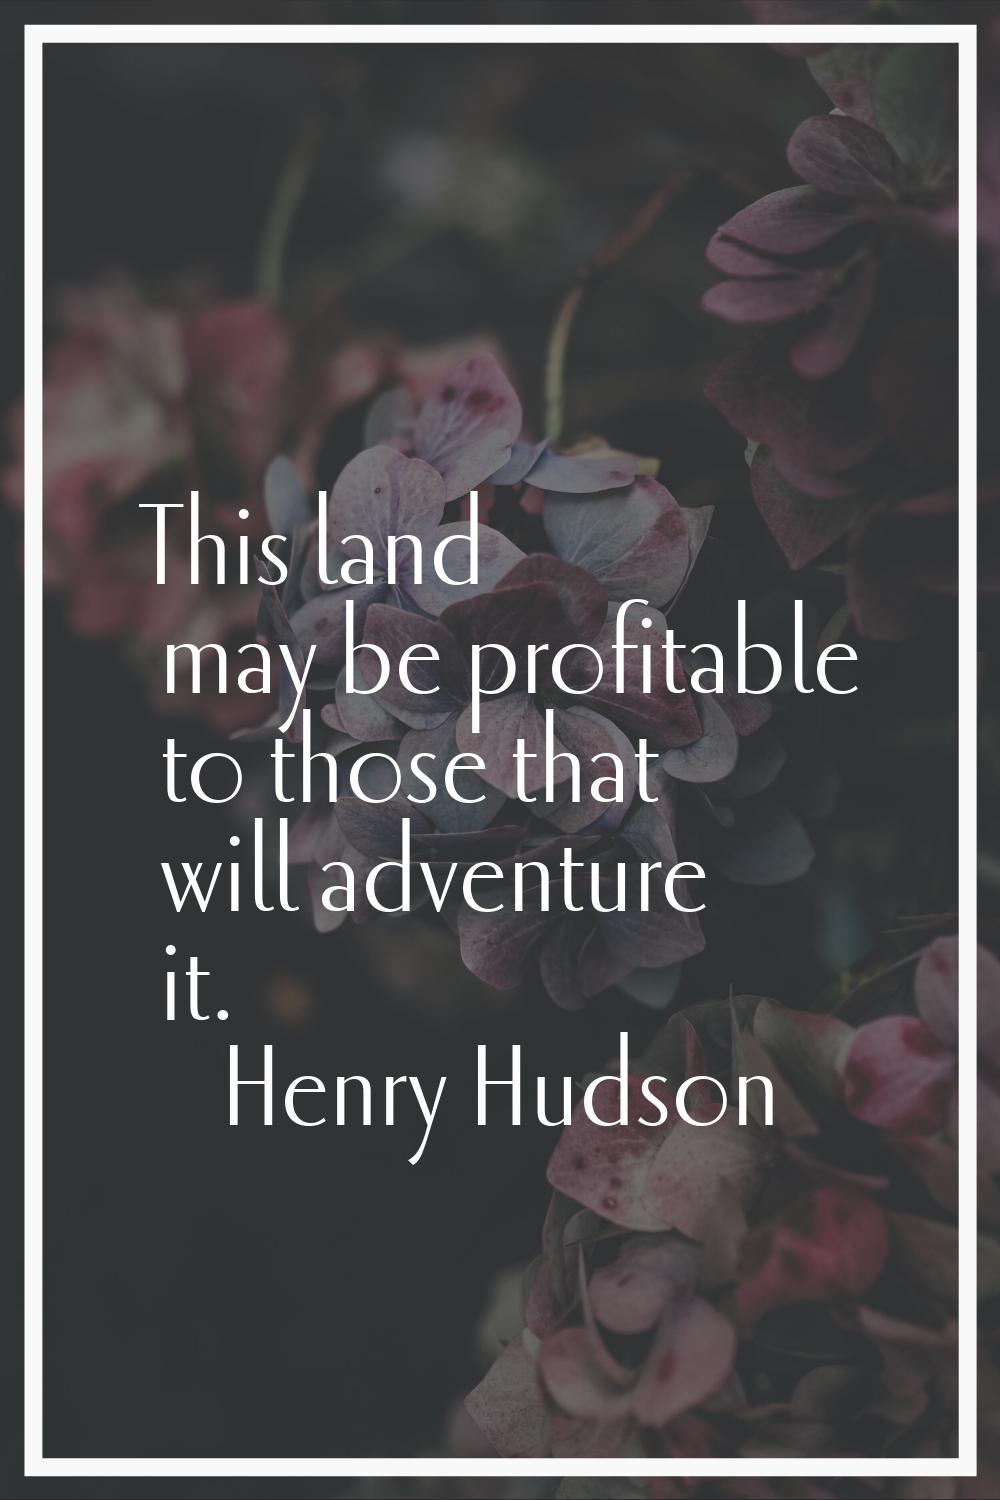 This land may be profitable to those that will adventure it.